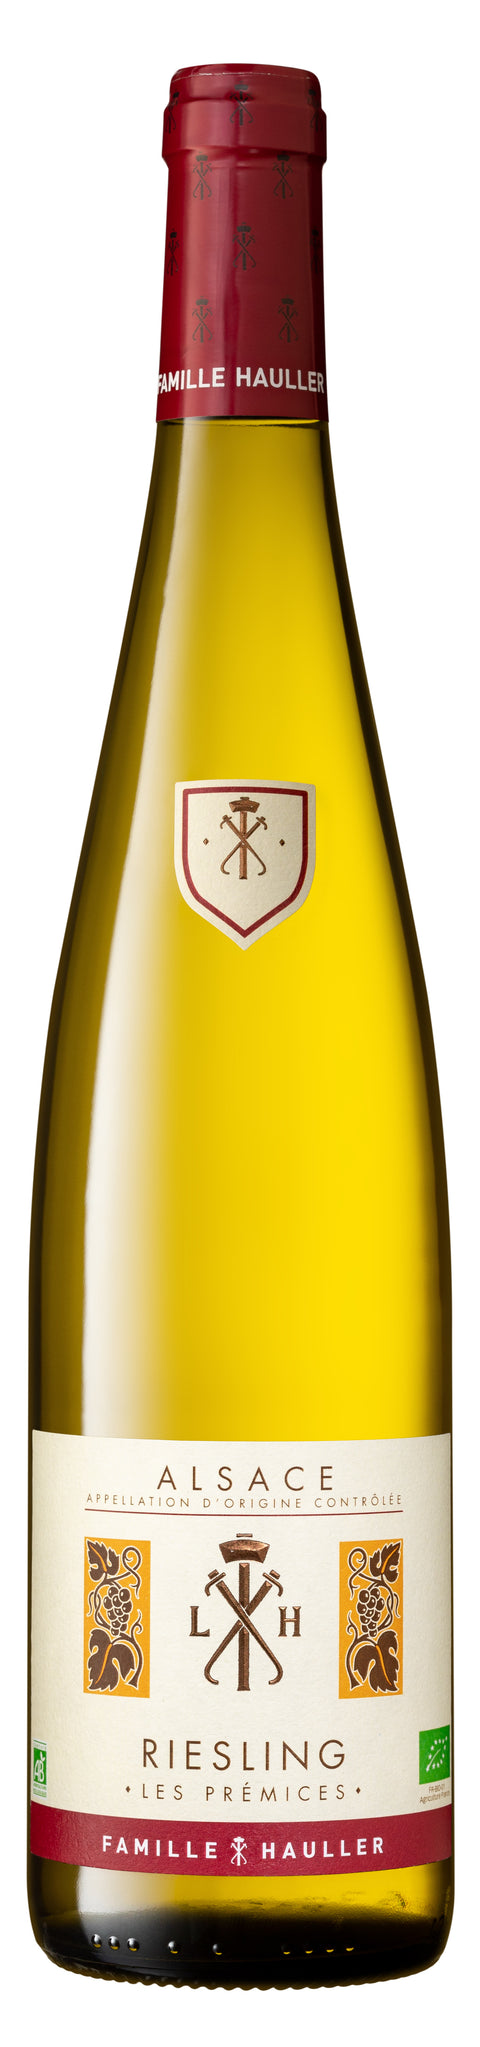 ALSACE RIESLING LES PREMICES